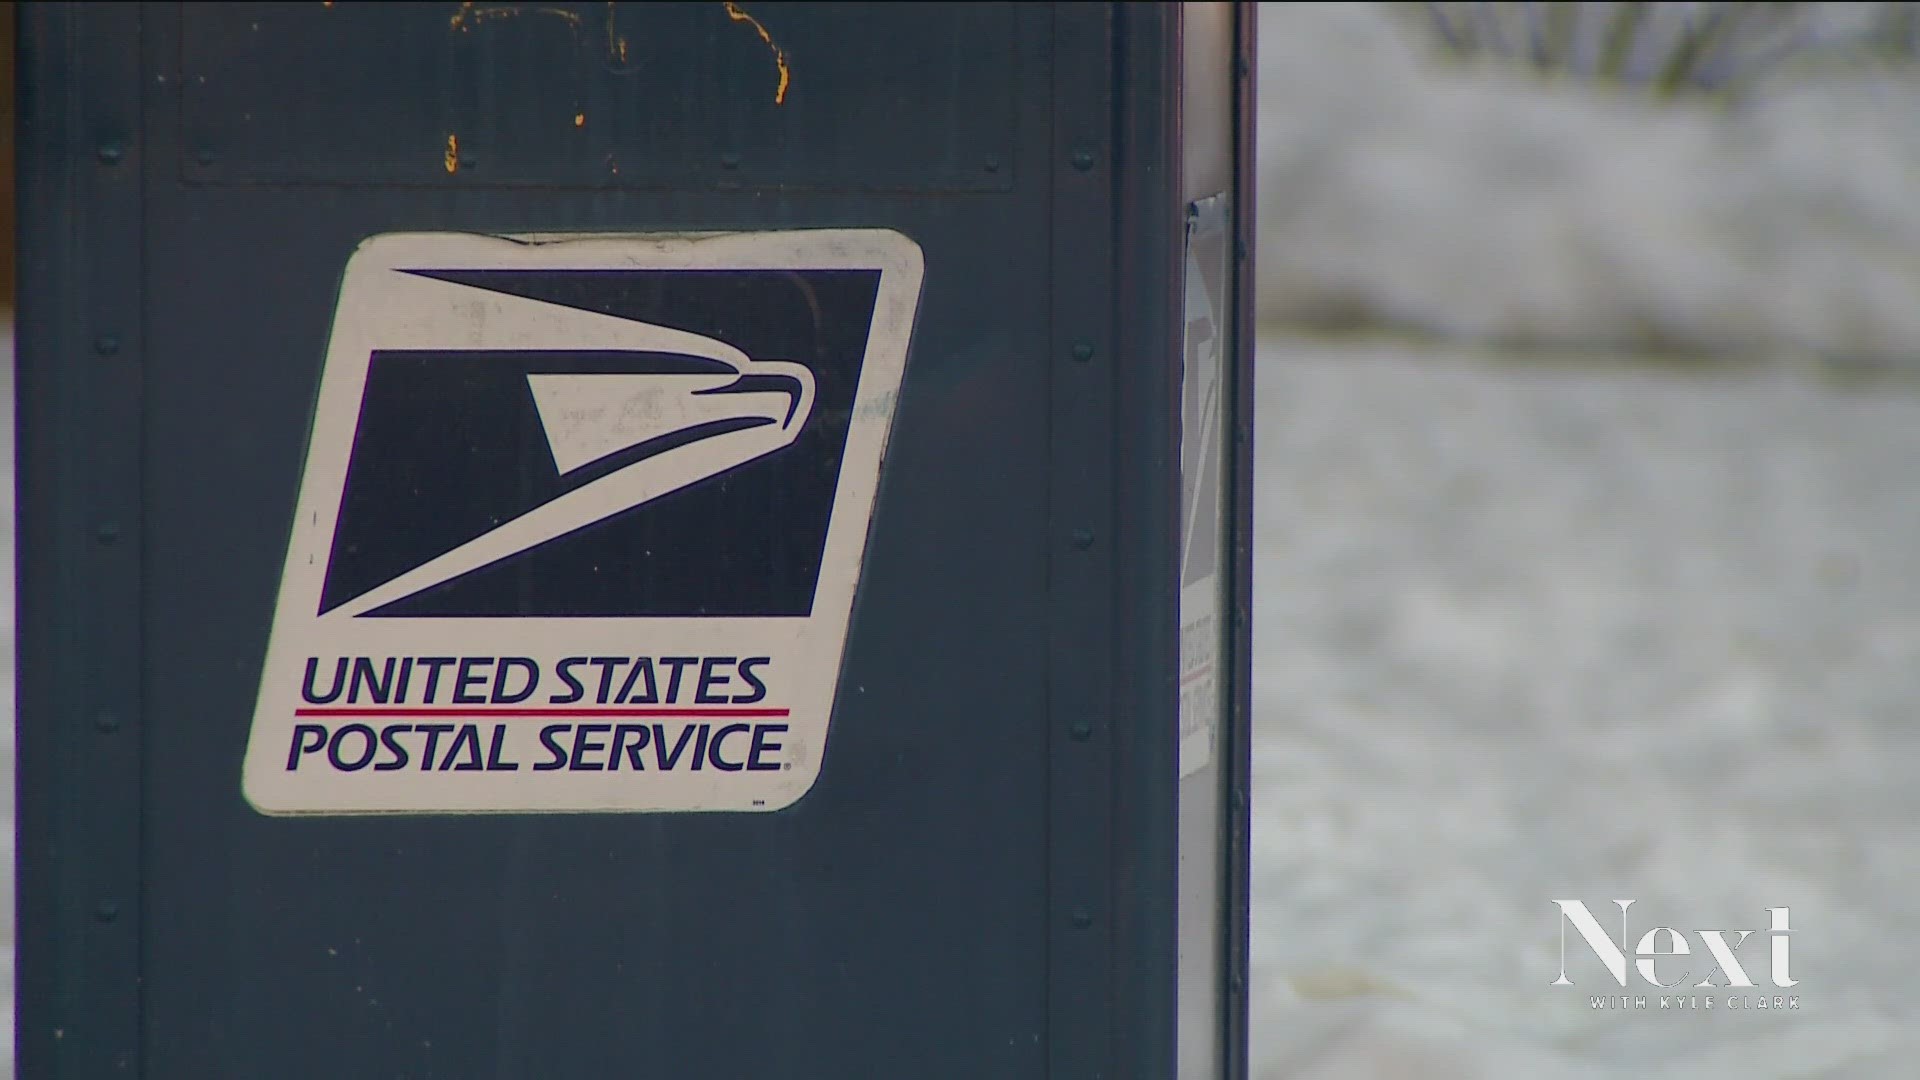 The Postal Service wants to consolidate regional processing centers across the country to save money.